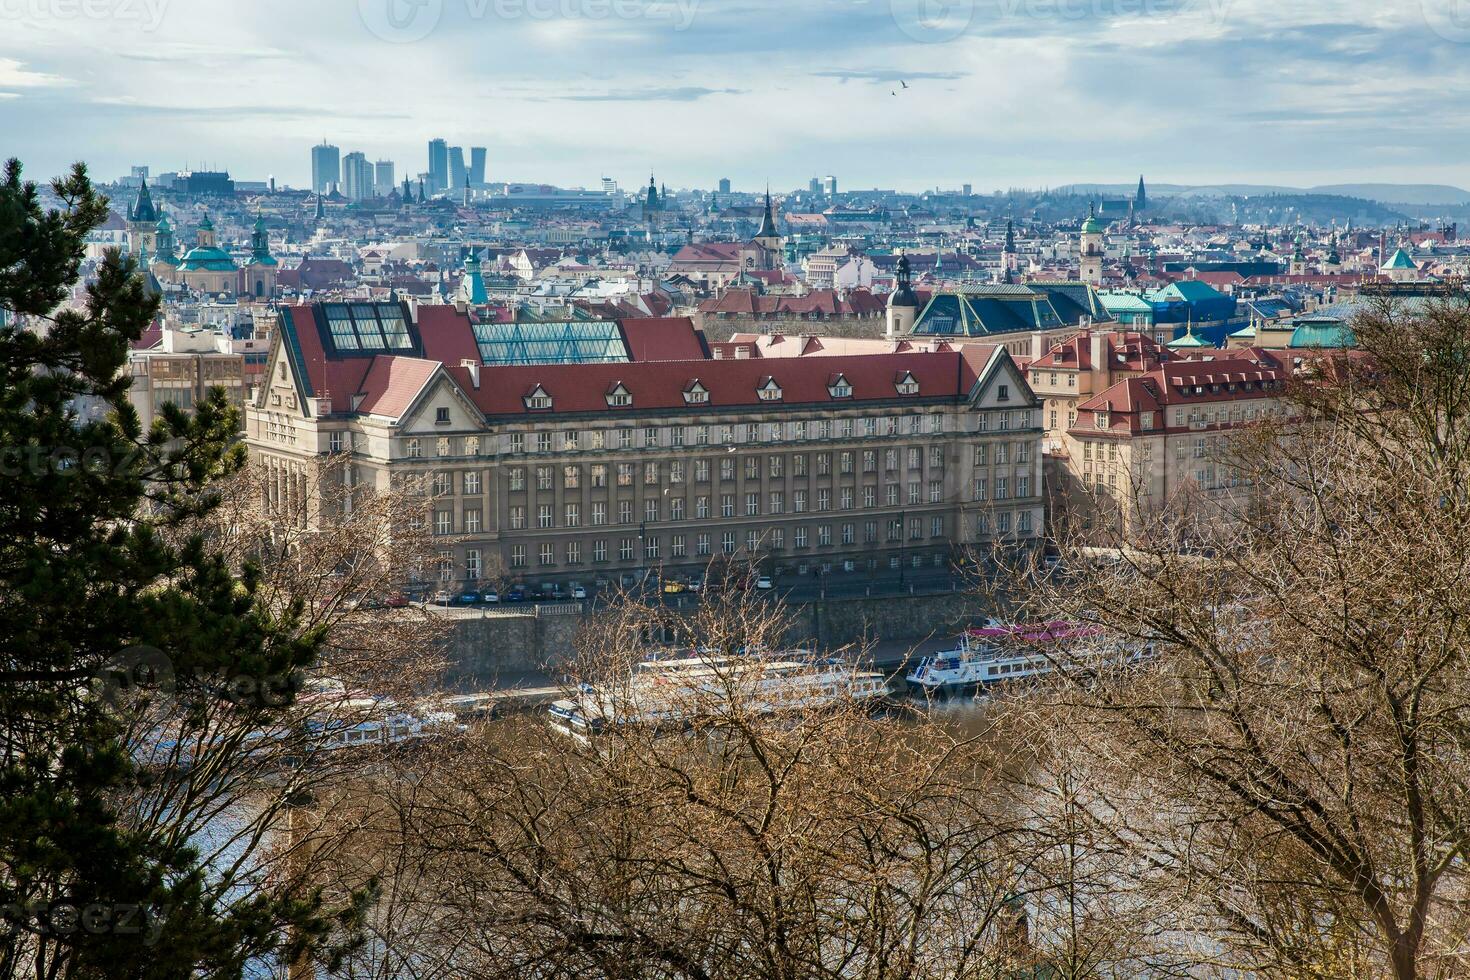 Prague city seen from the Letna hill in a beautiful early spring day photo